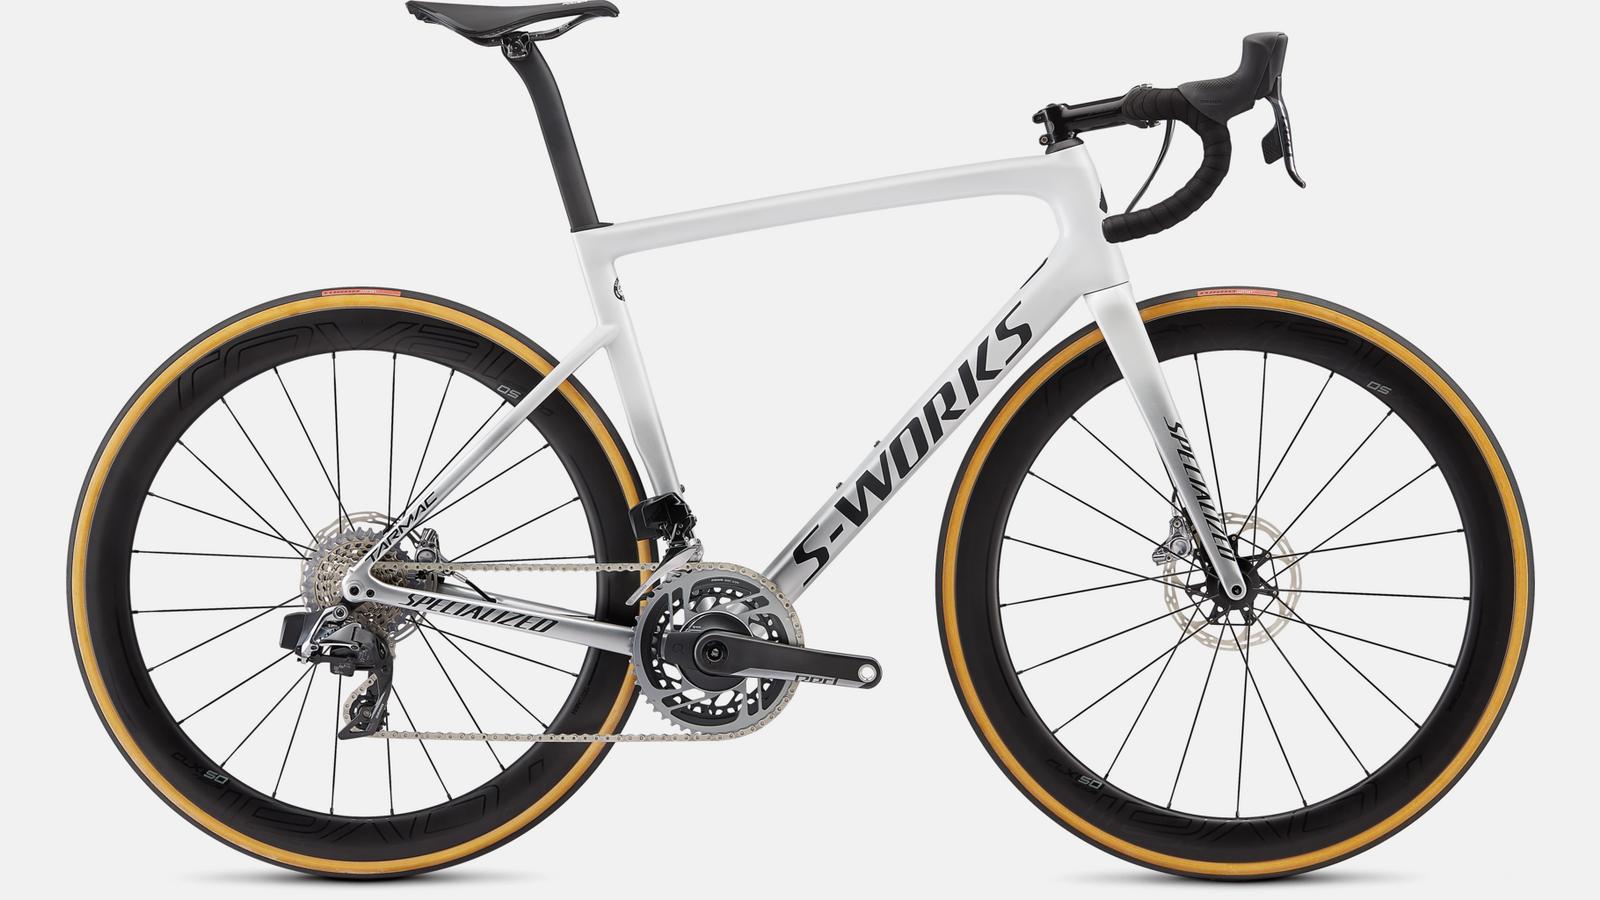 Paint for 2020 Specialized S-Works Tarmac SL6 - SRAM Red eTap AXS - Gloss Metallic White Silver